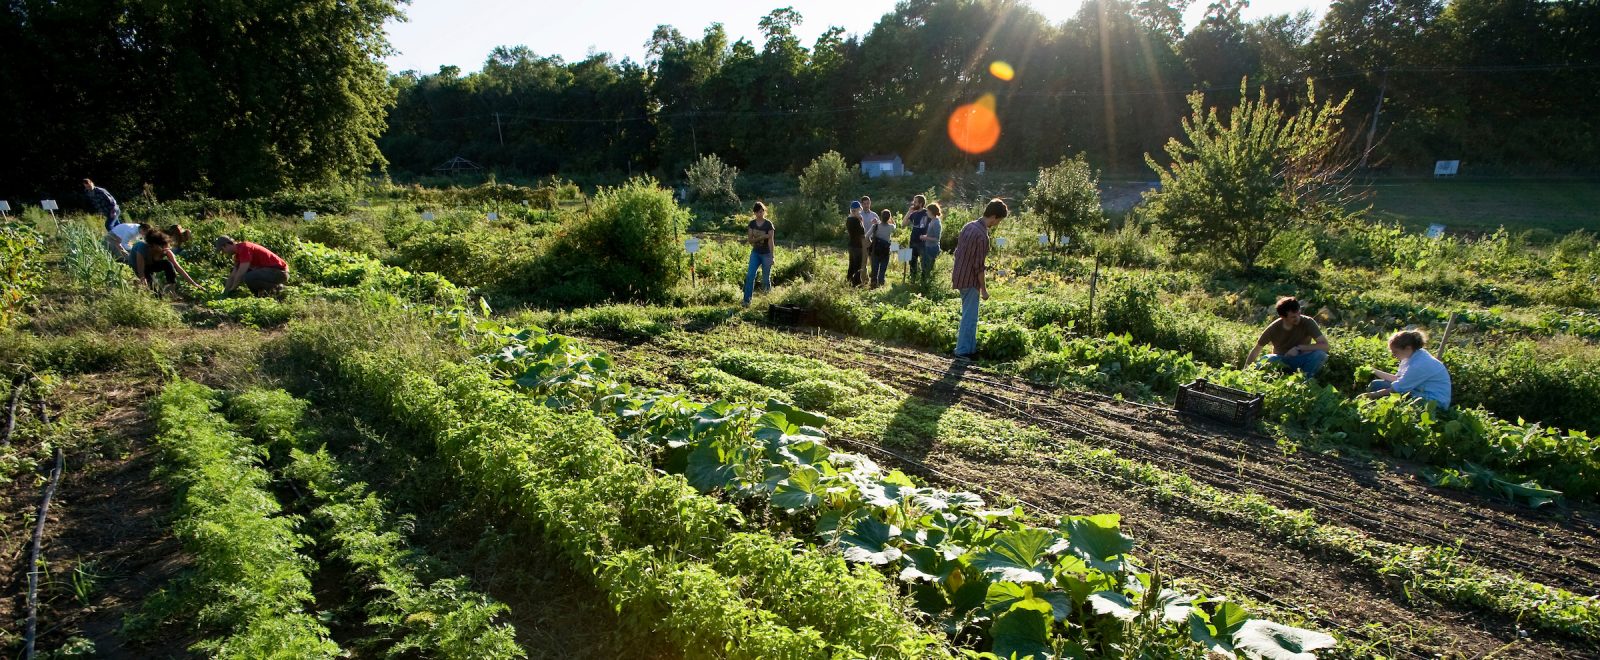 Community garden with a dozen people harvesting amidst the rows of crops